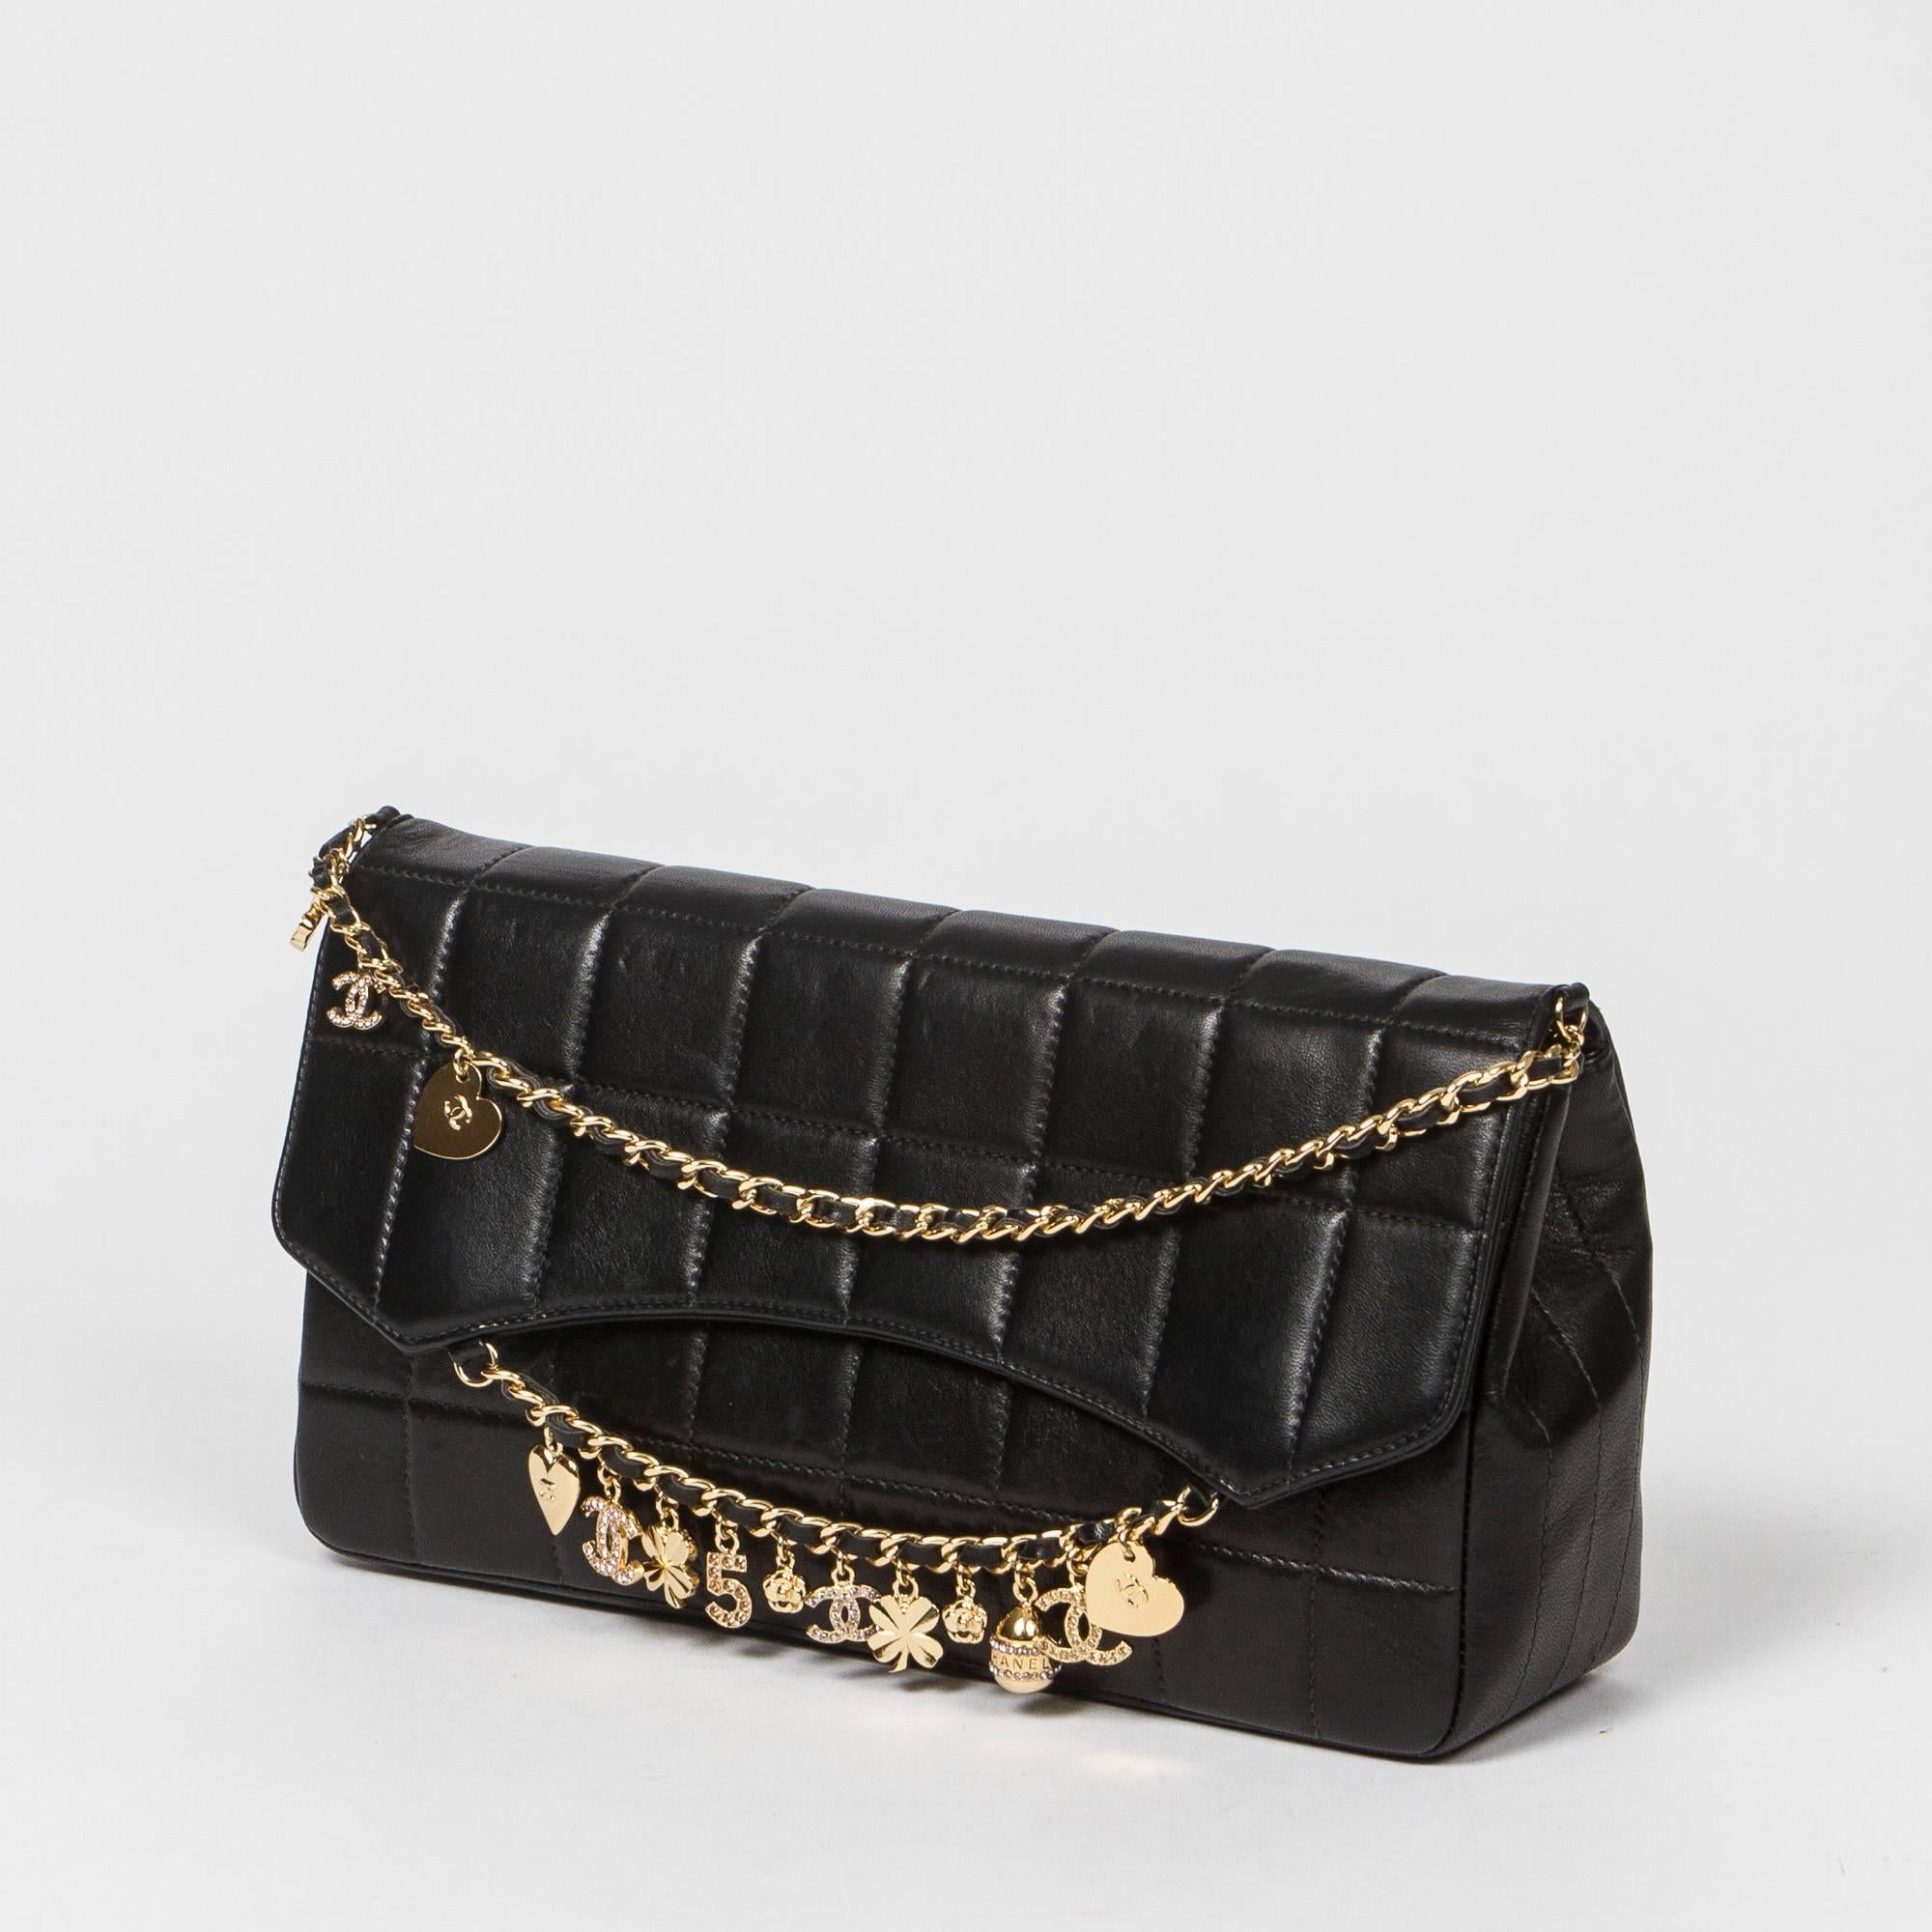 Charms shoulder bag in black quilted leather with gold tone chain strap interlaced with black leather. Snap closure. Black leather lined interior with one slip pocket and one zip pocket. Dustbag included. The bag has still its sticker 7499666, no